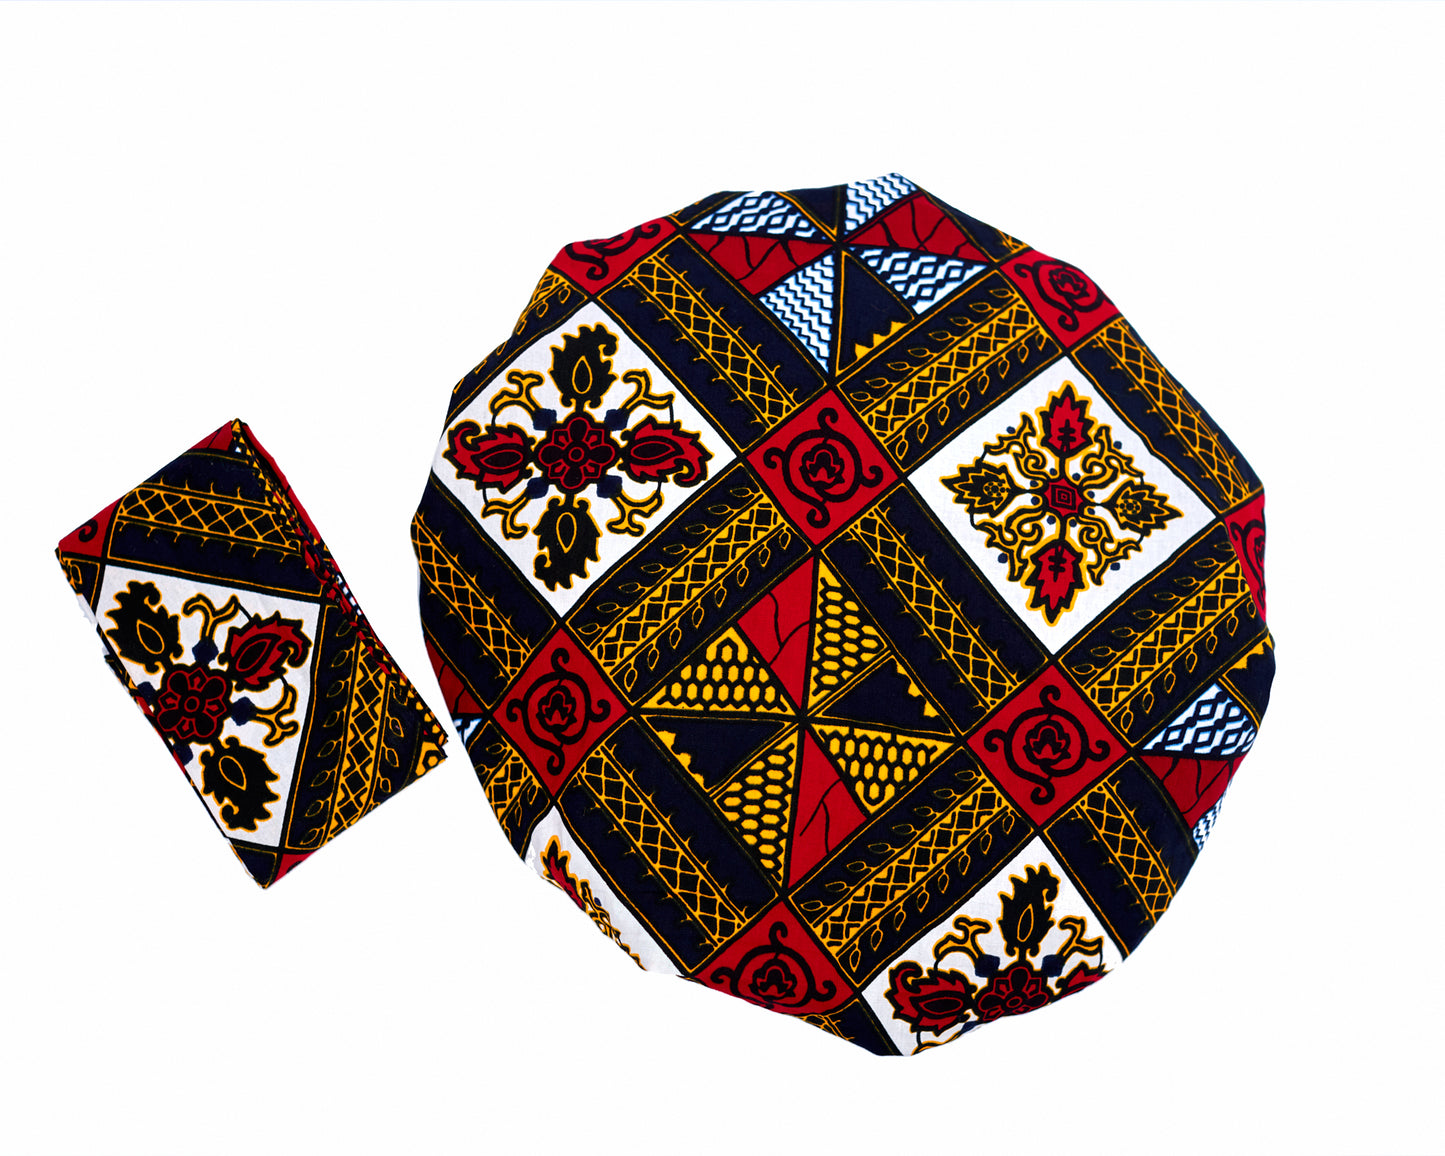 Ankara Wax Print Made of Red, Blue, Gold, Black And White Blended Beautiful Colours And Pattern, Hand Made Elastic Silklined Bonnet With Band